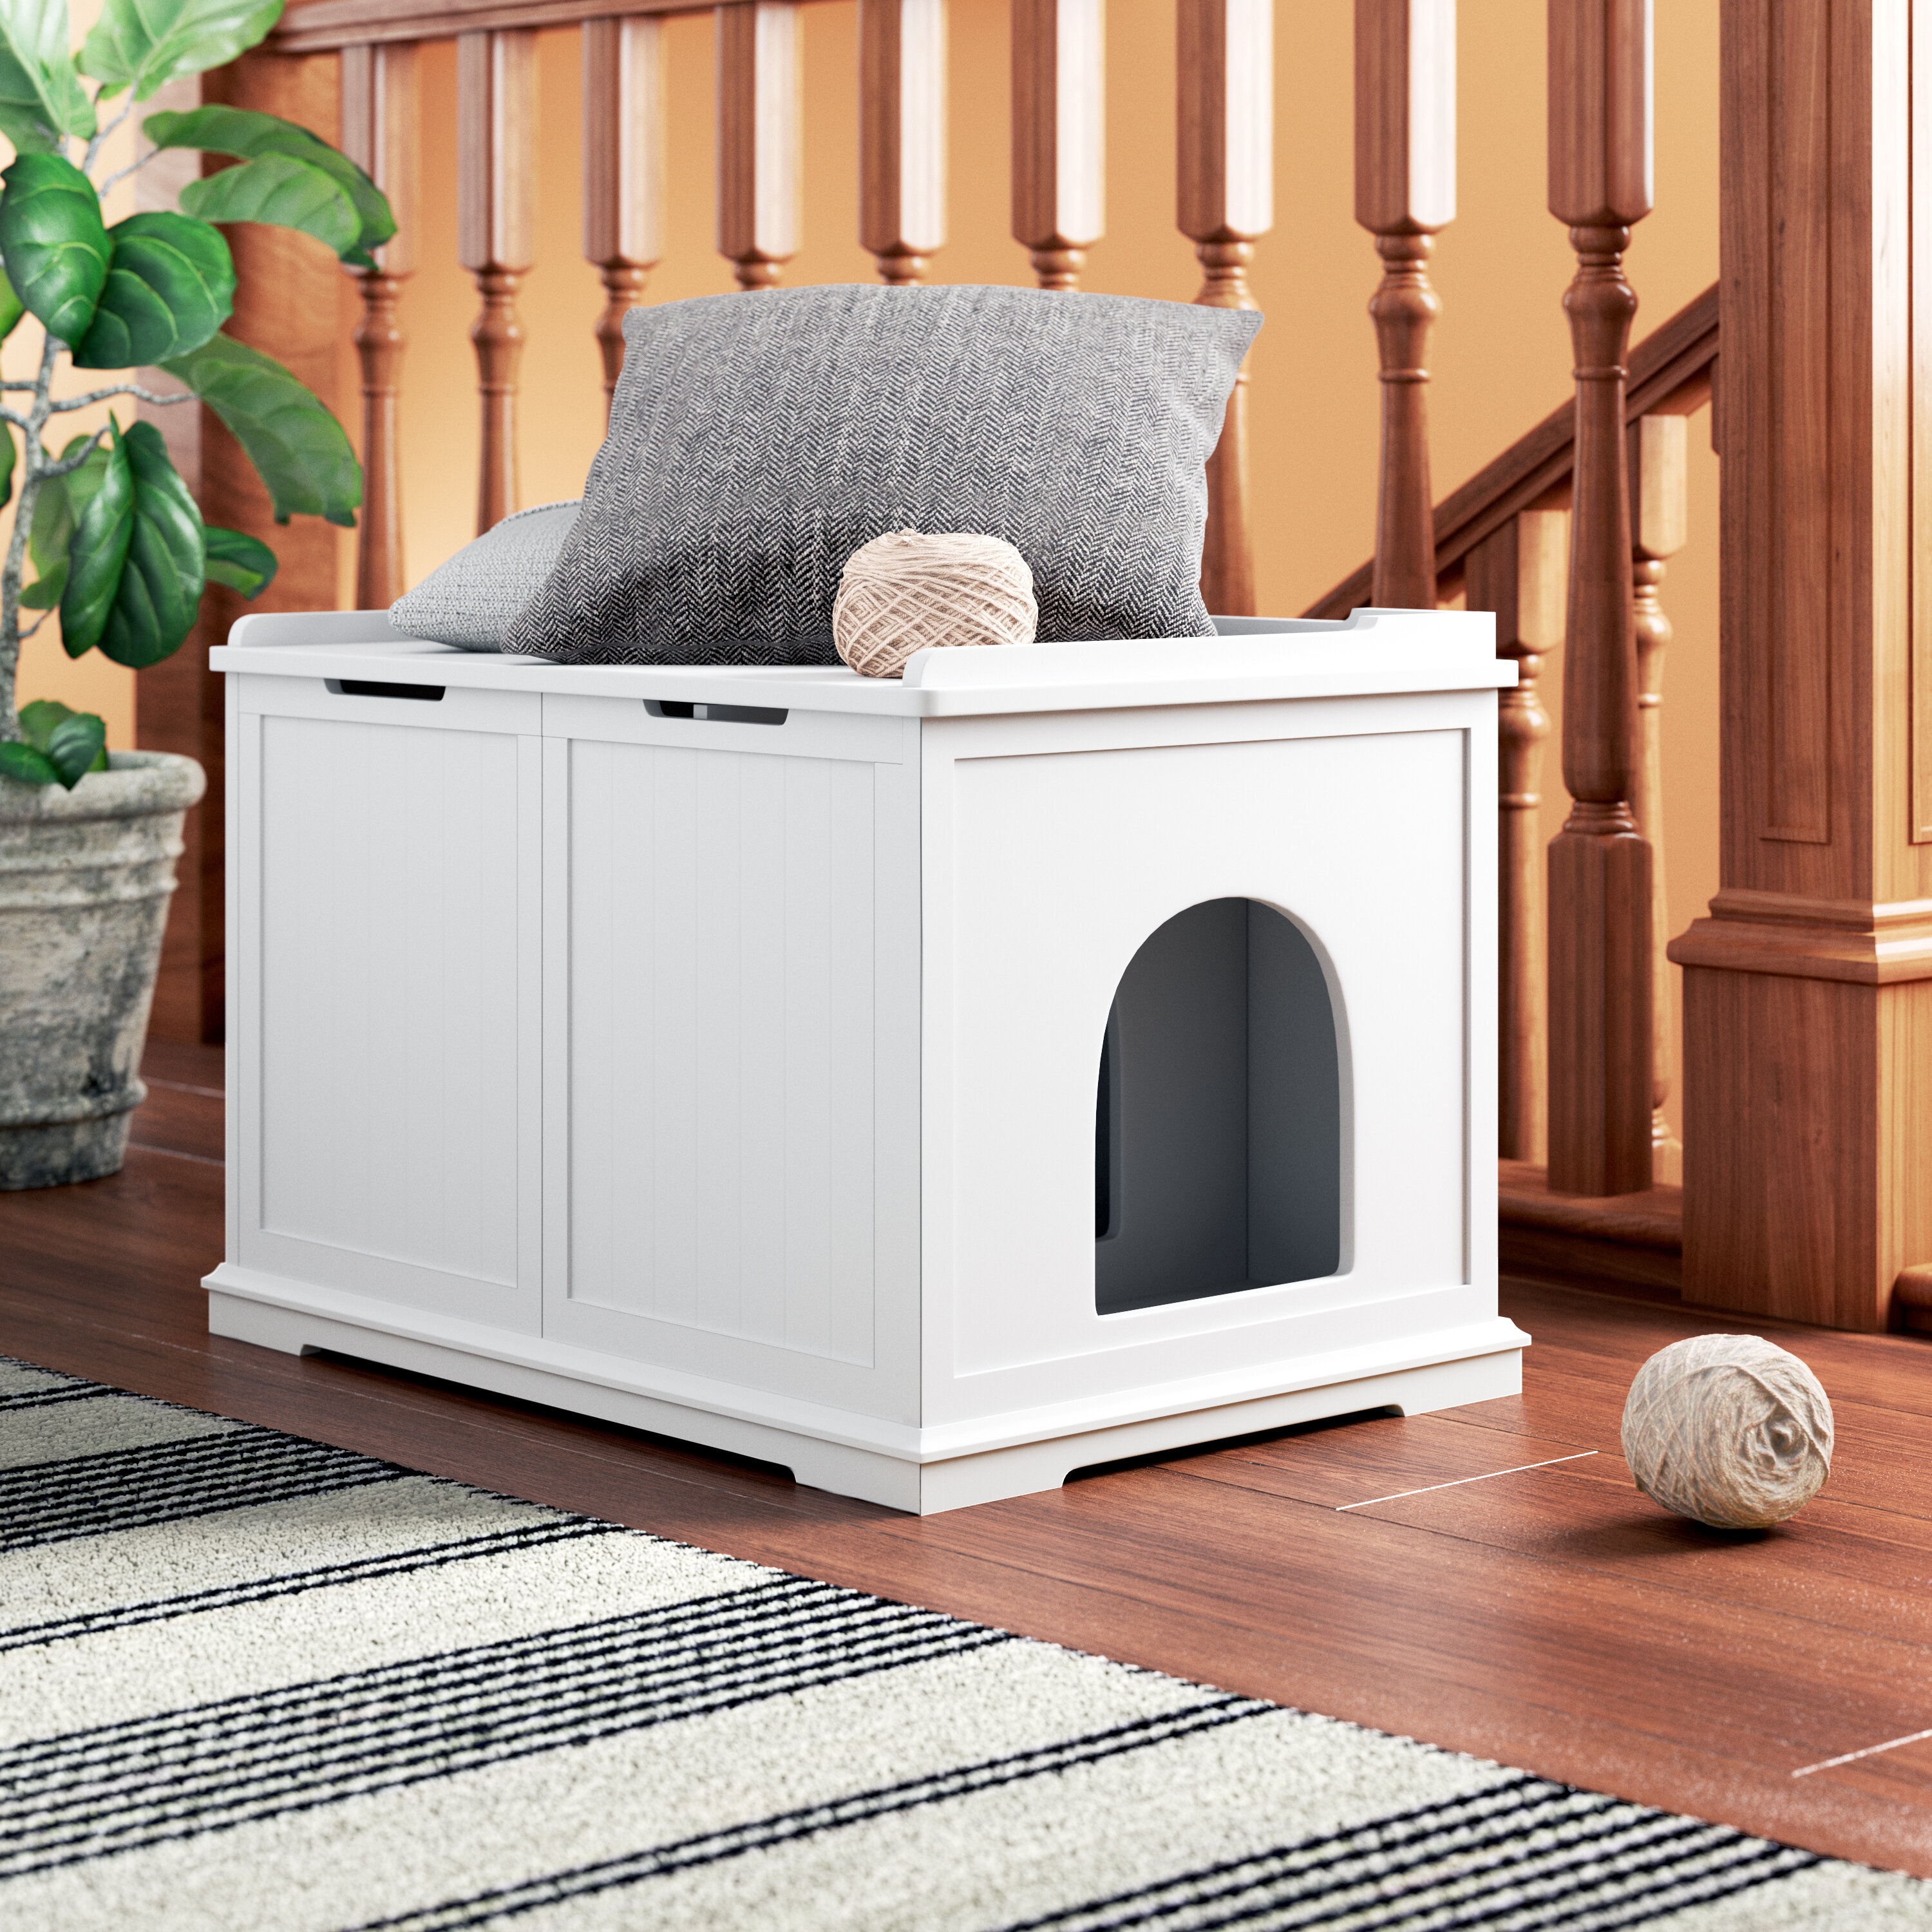 9 Best Pieces Of Litter Box Furniture On Amazon - DodoWell - The Dodo